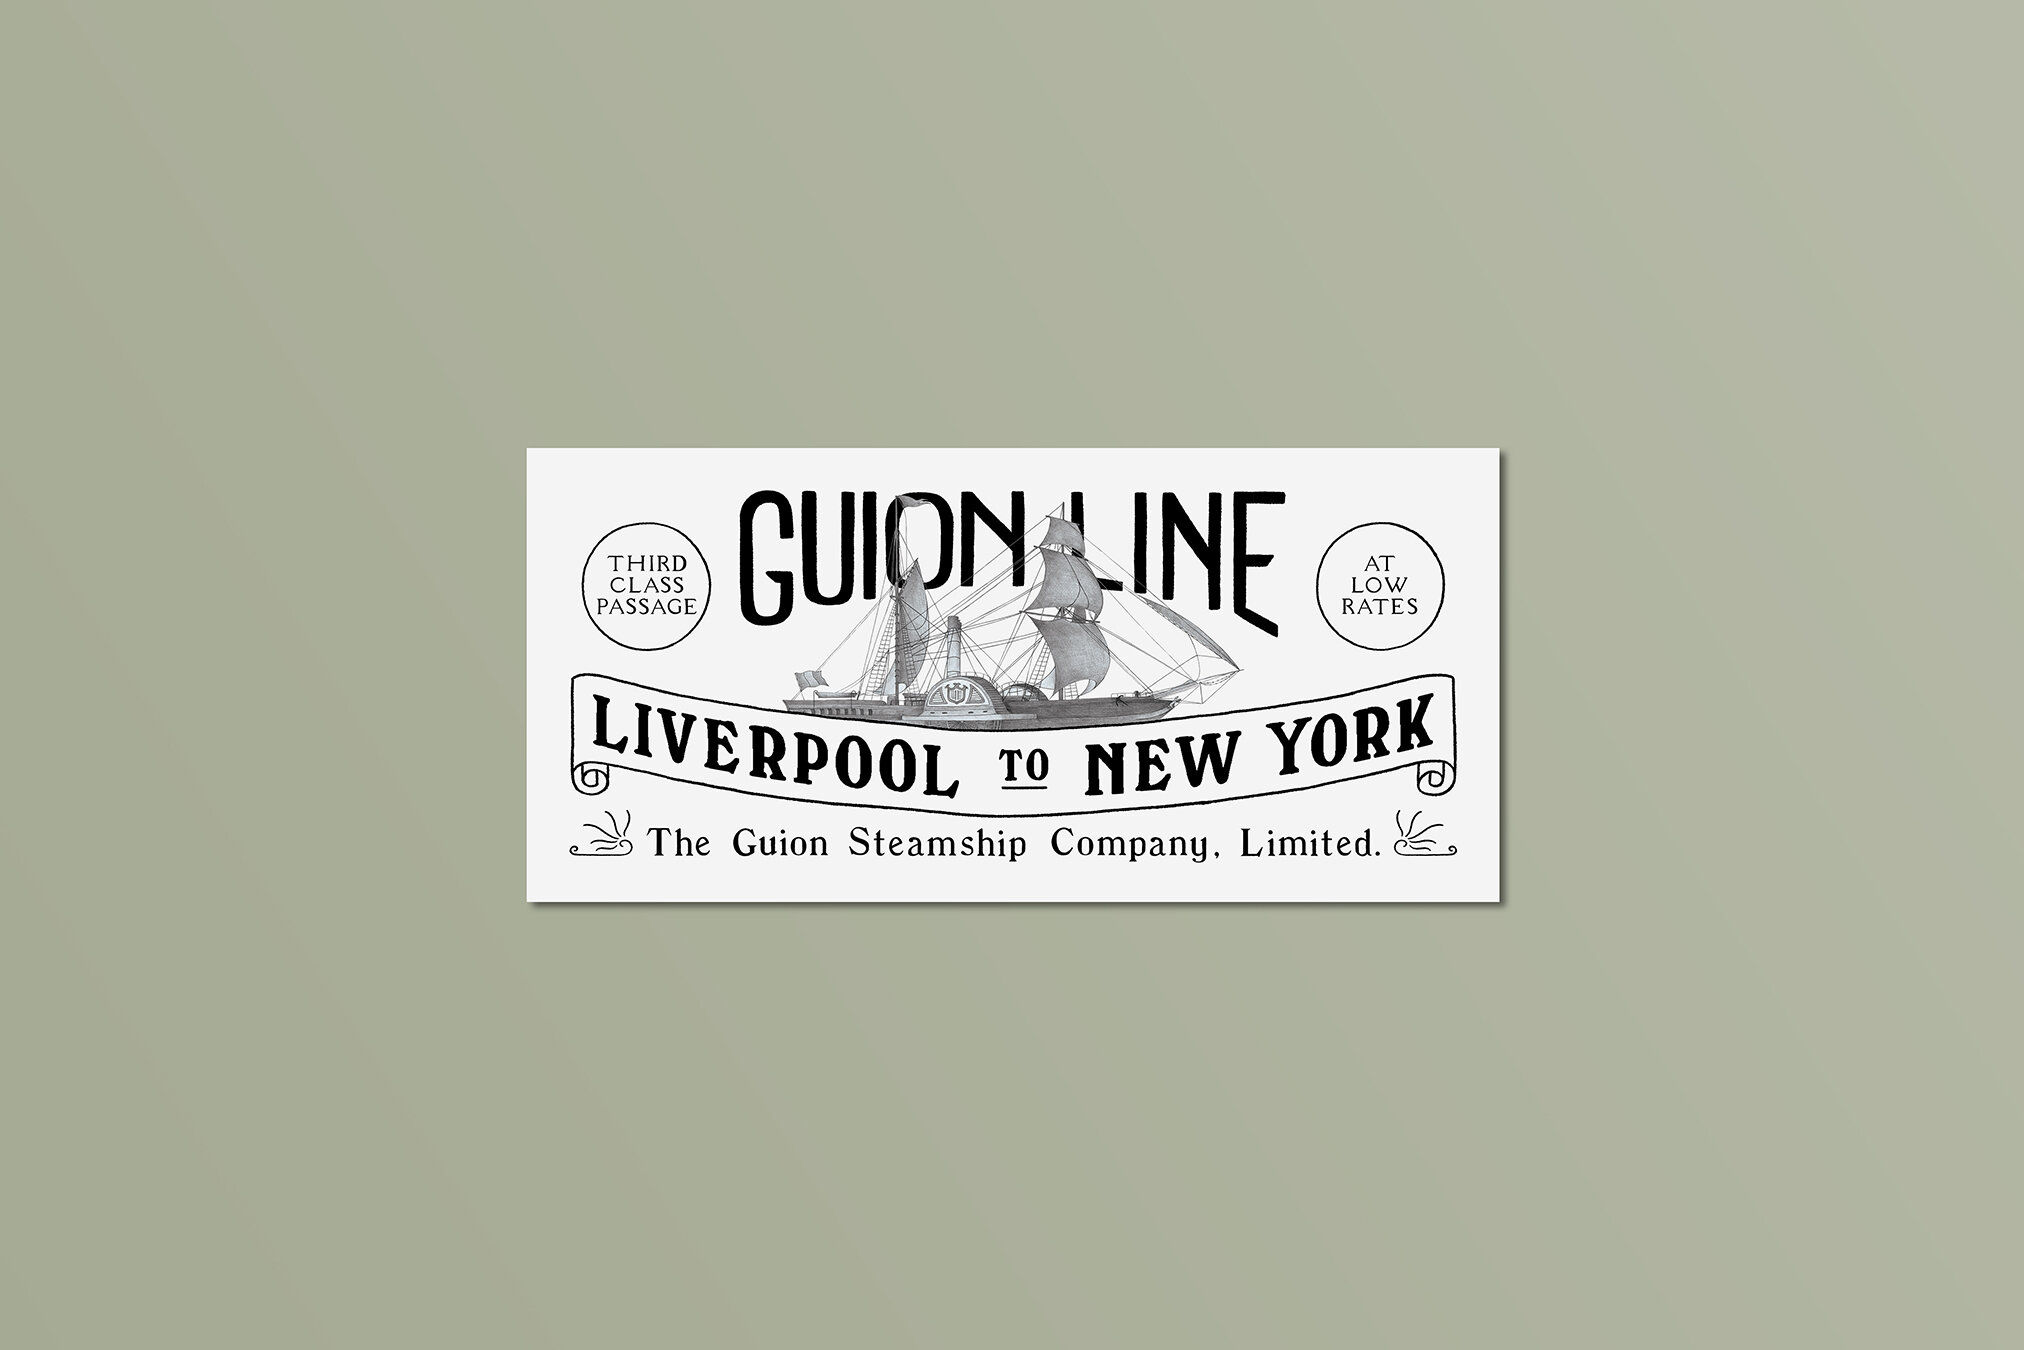 83 - Hats and Type clipping Guion Line.jpg